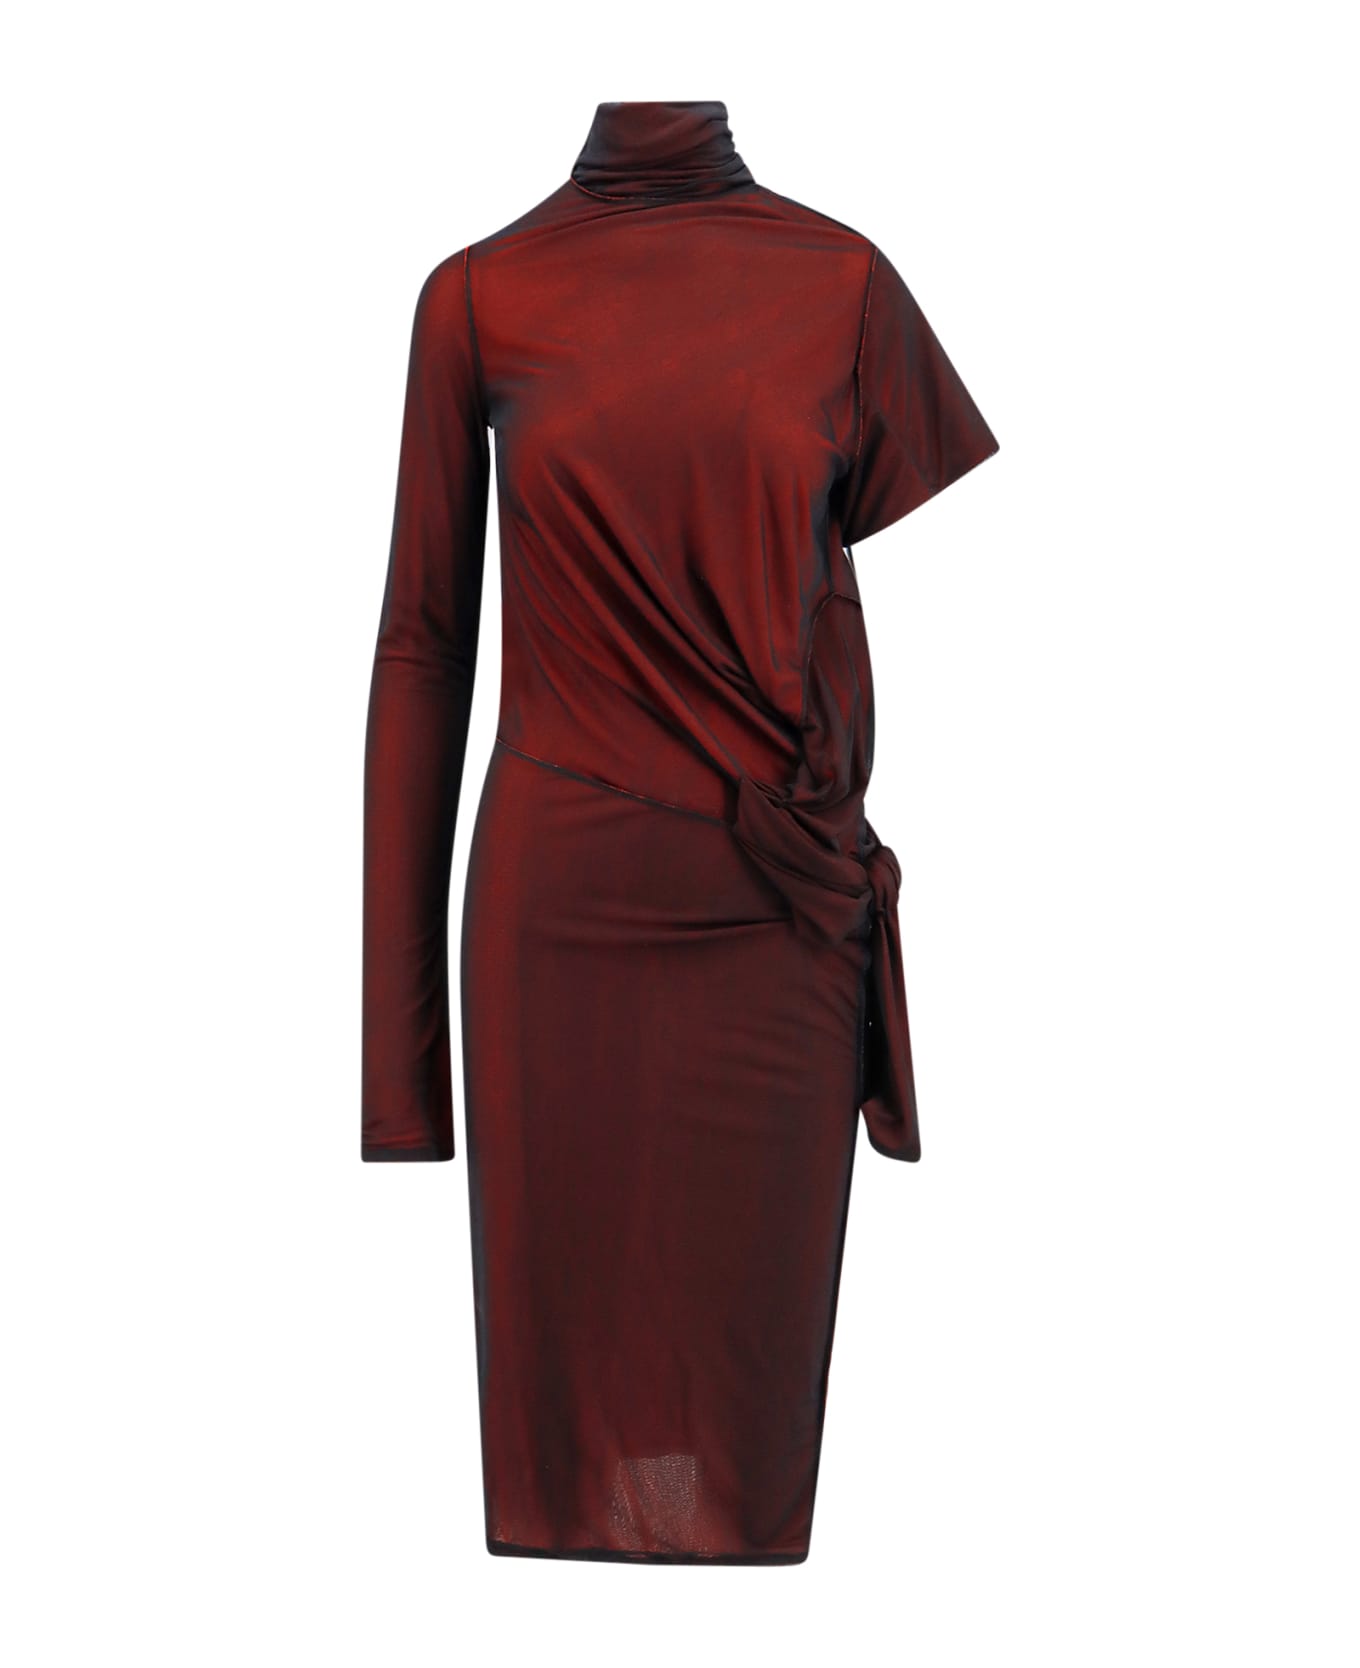 Maison Margiela Viscose Dress With Asymmetric Sleeves - Red